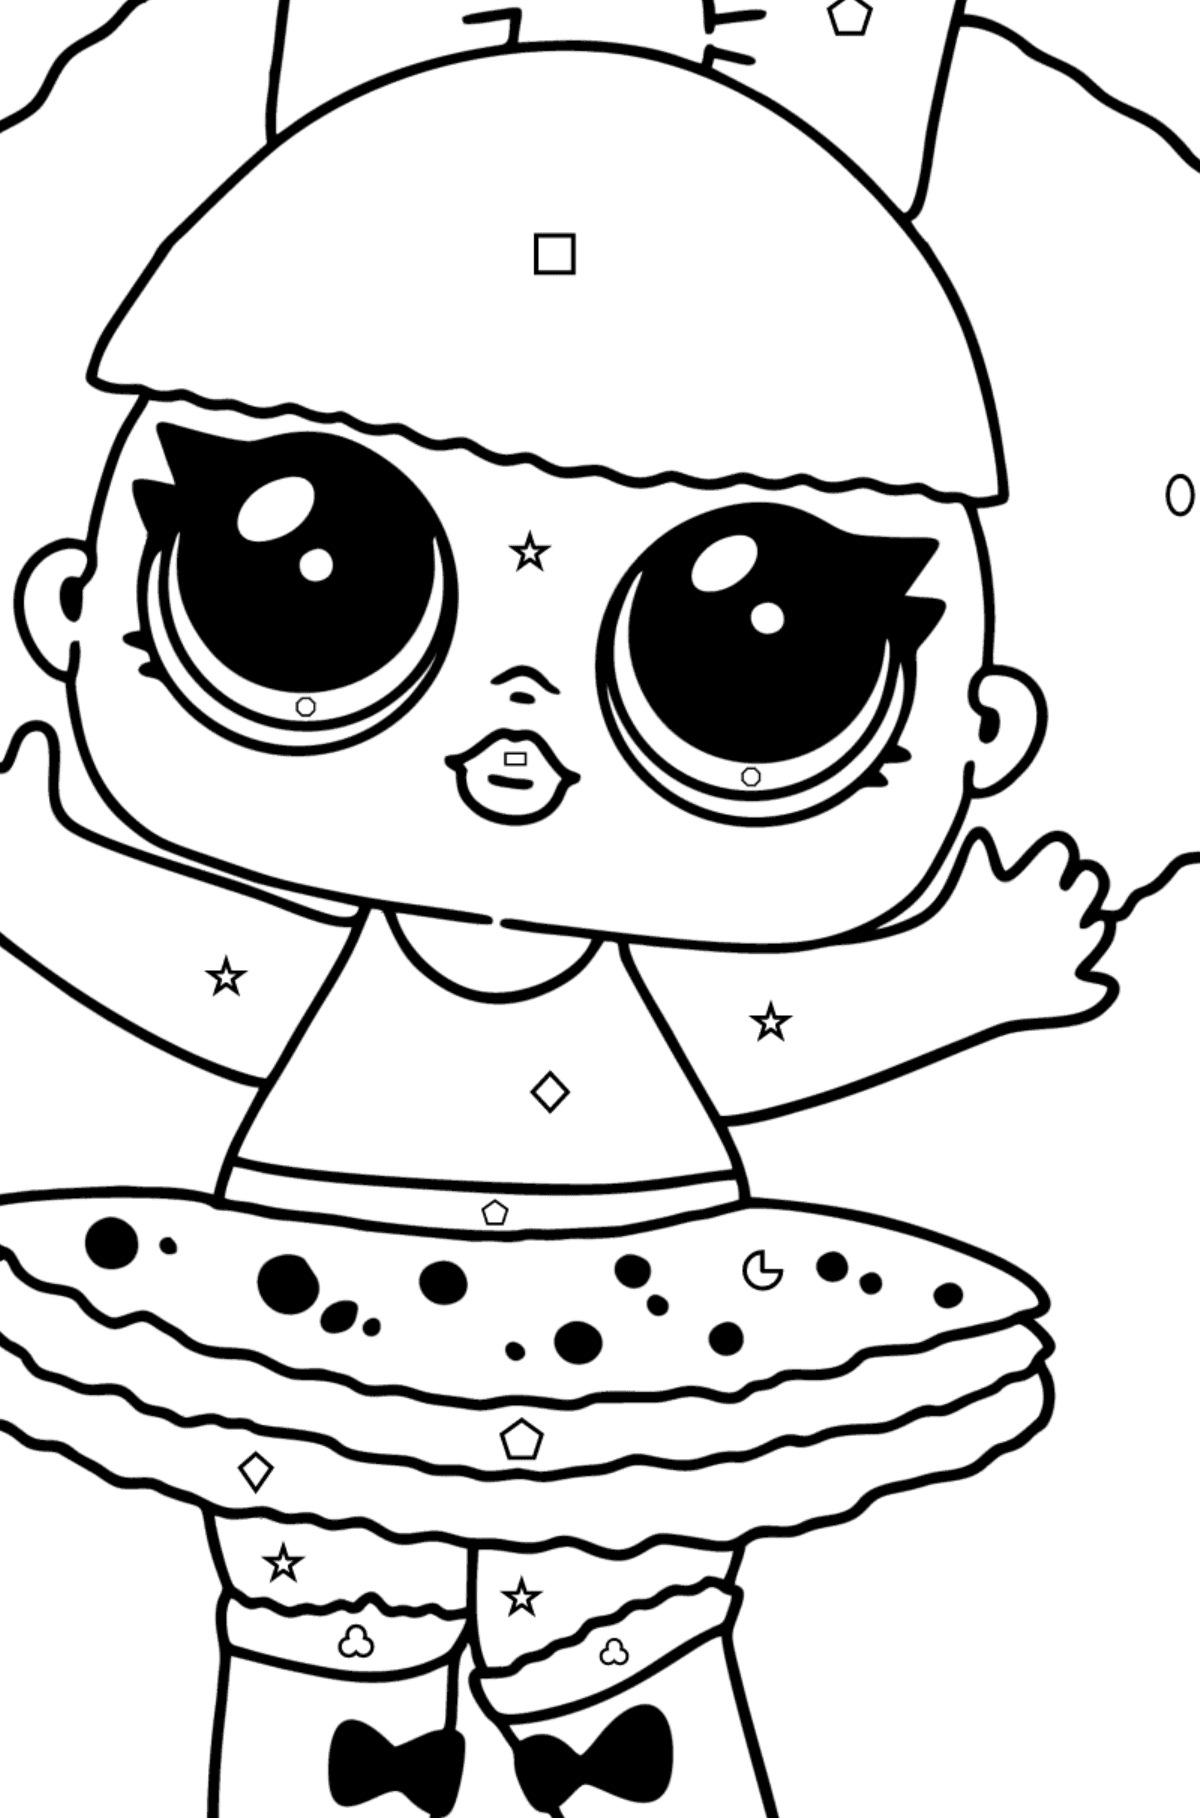 LOL Surprise Diva coloring page ♥ Online and Print for Free